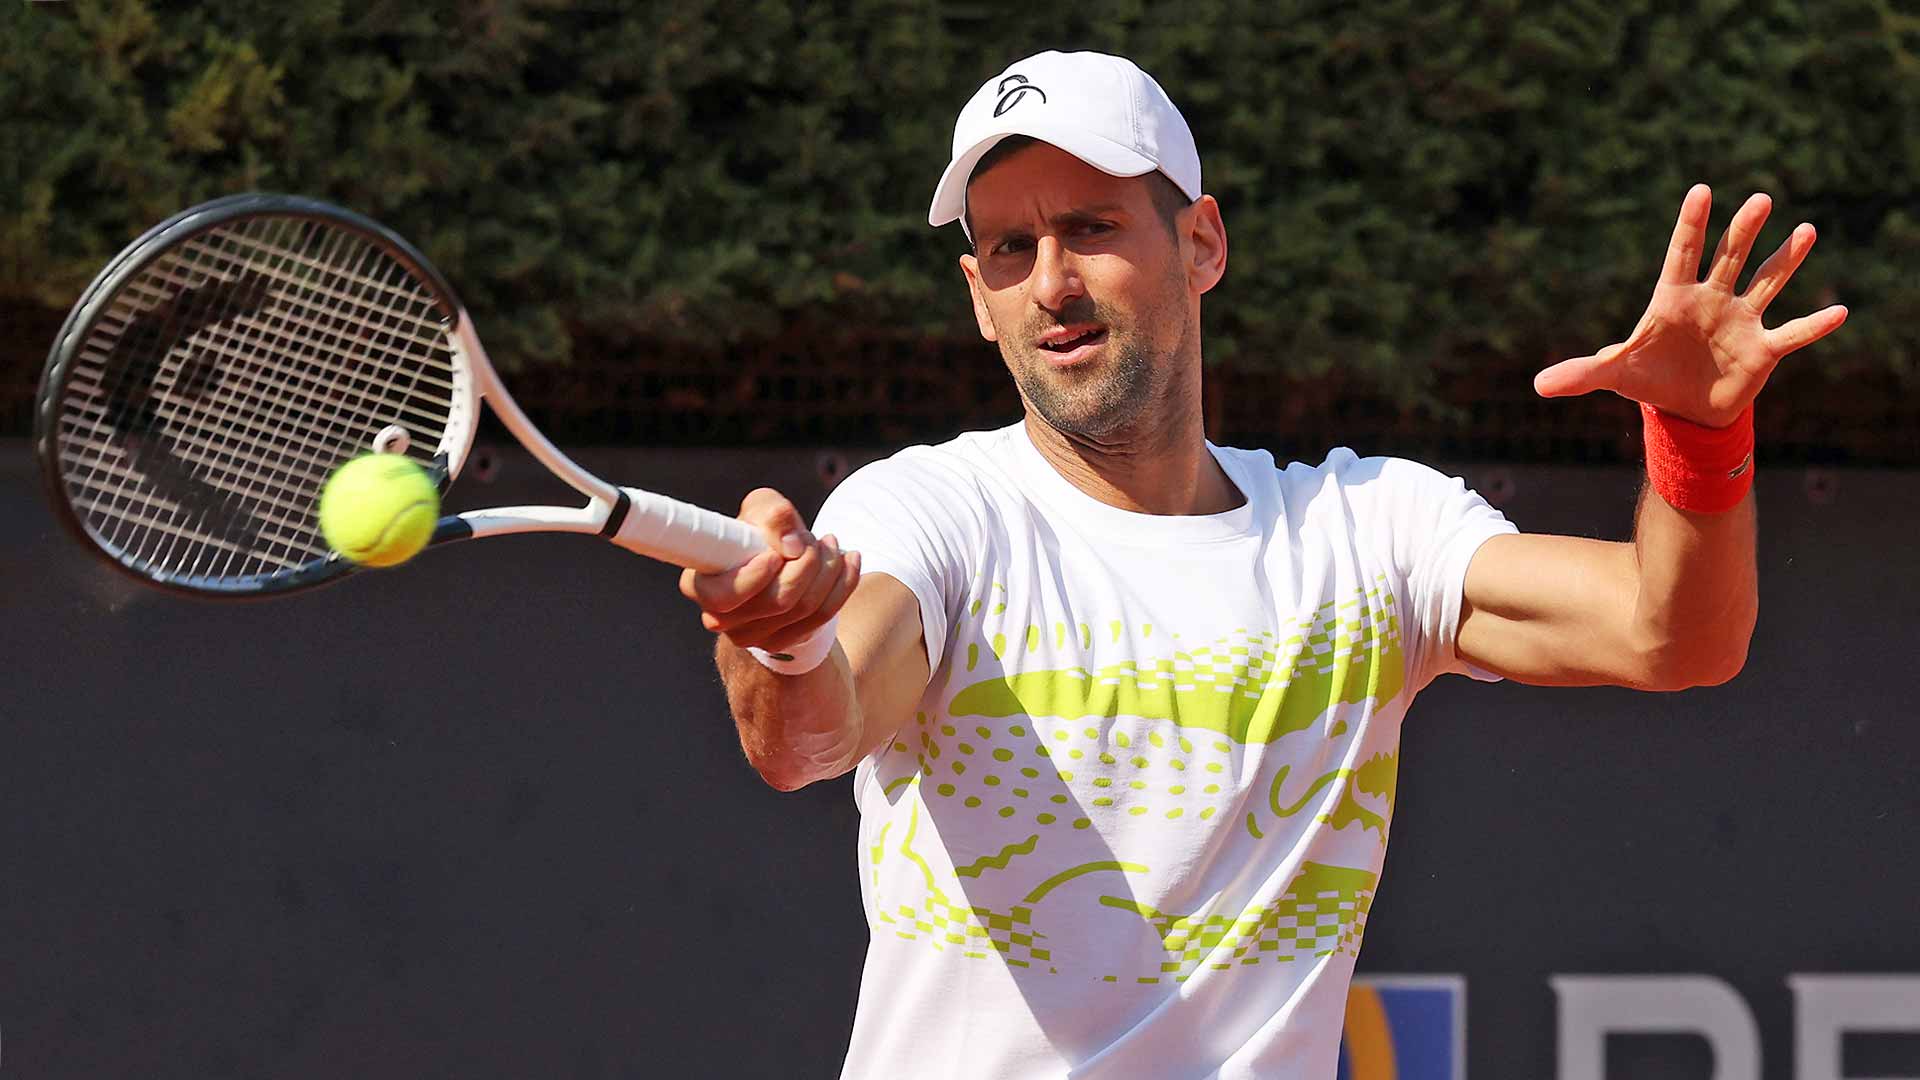 Novak Djokovic fires a forehand during pre-tournament practice in Rome.